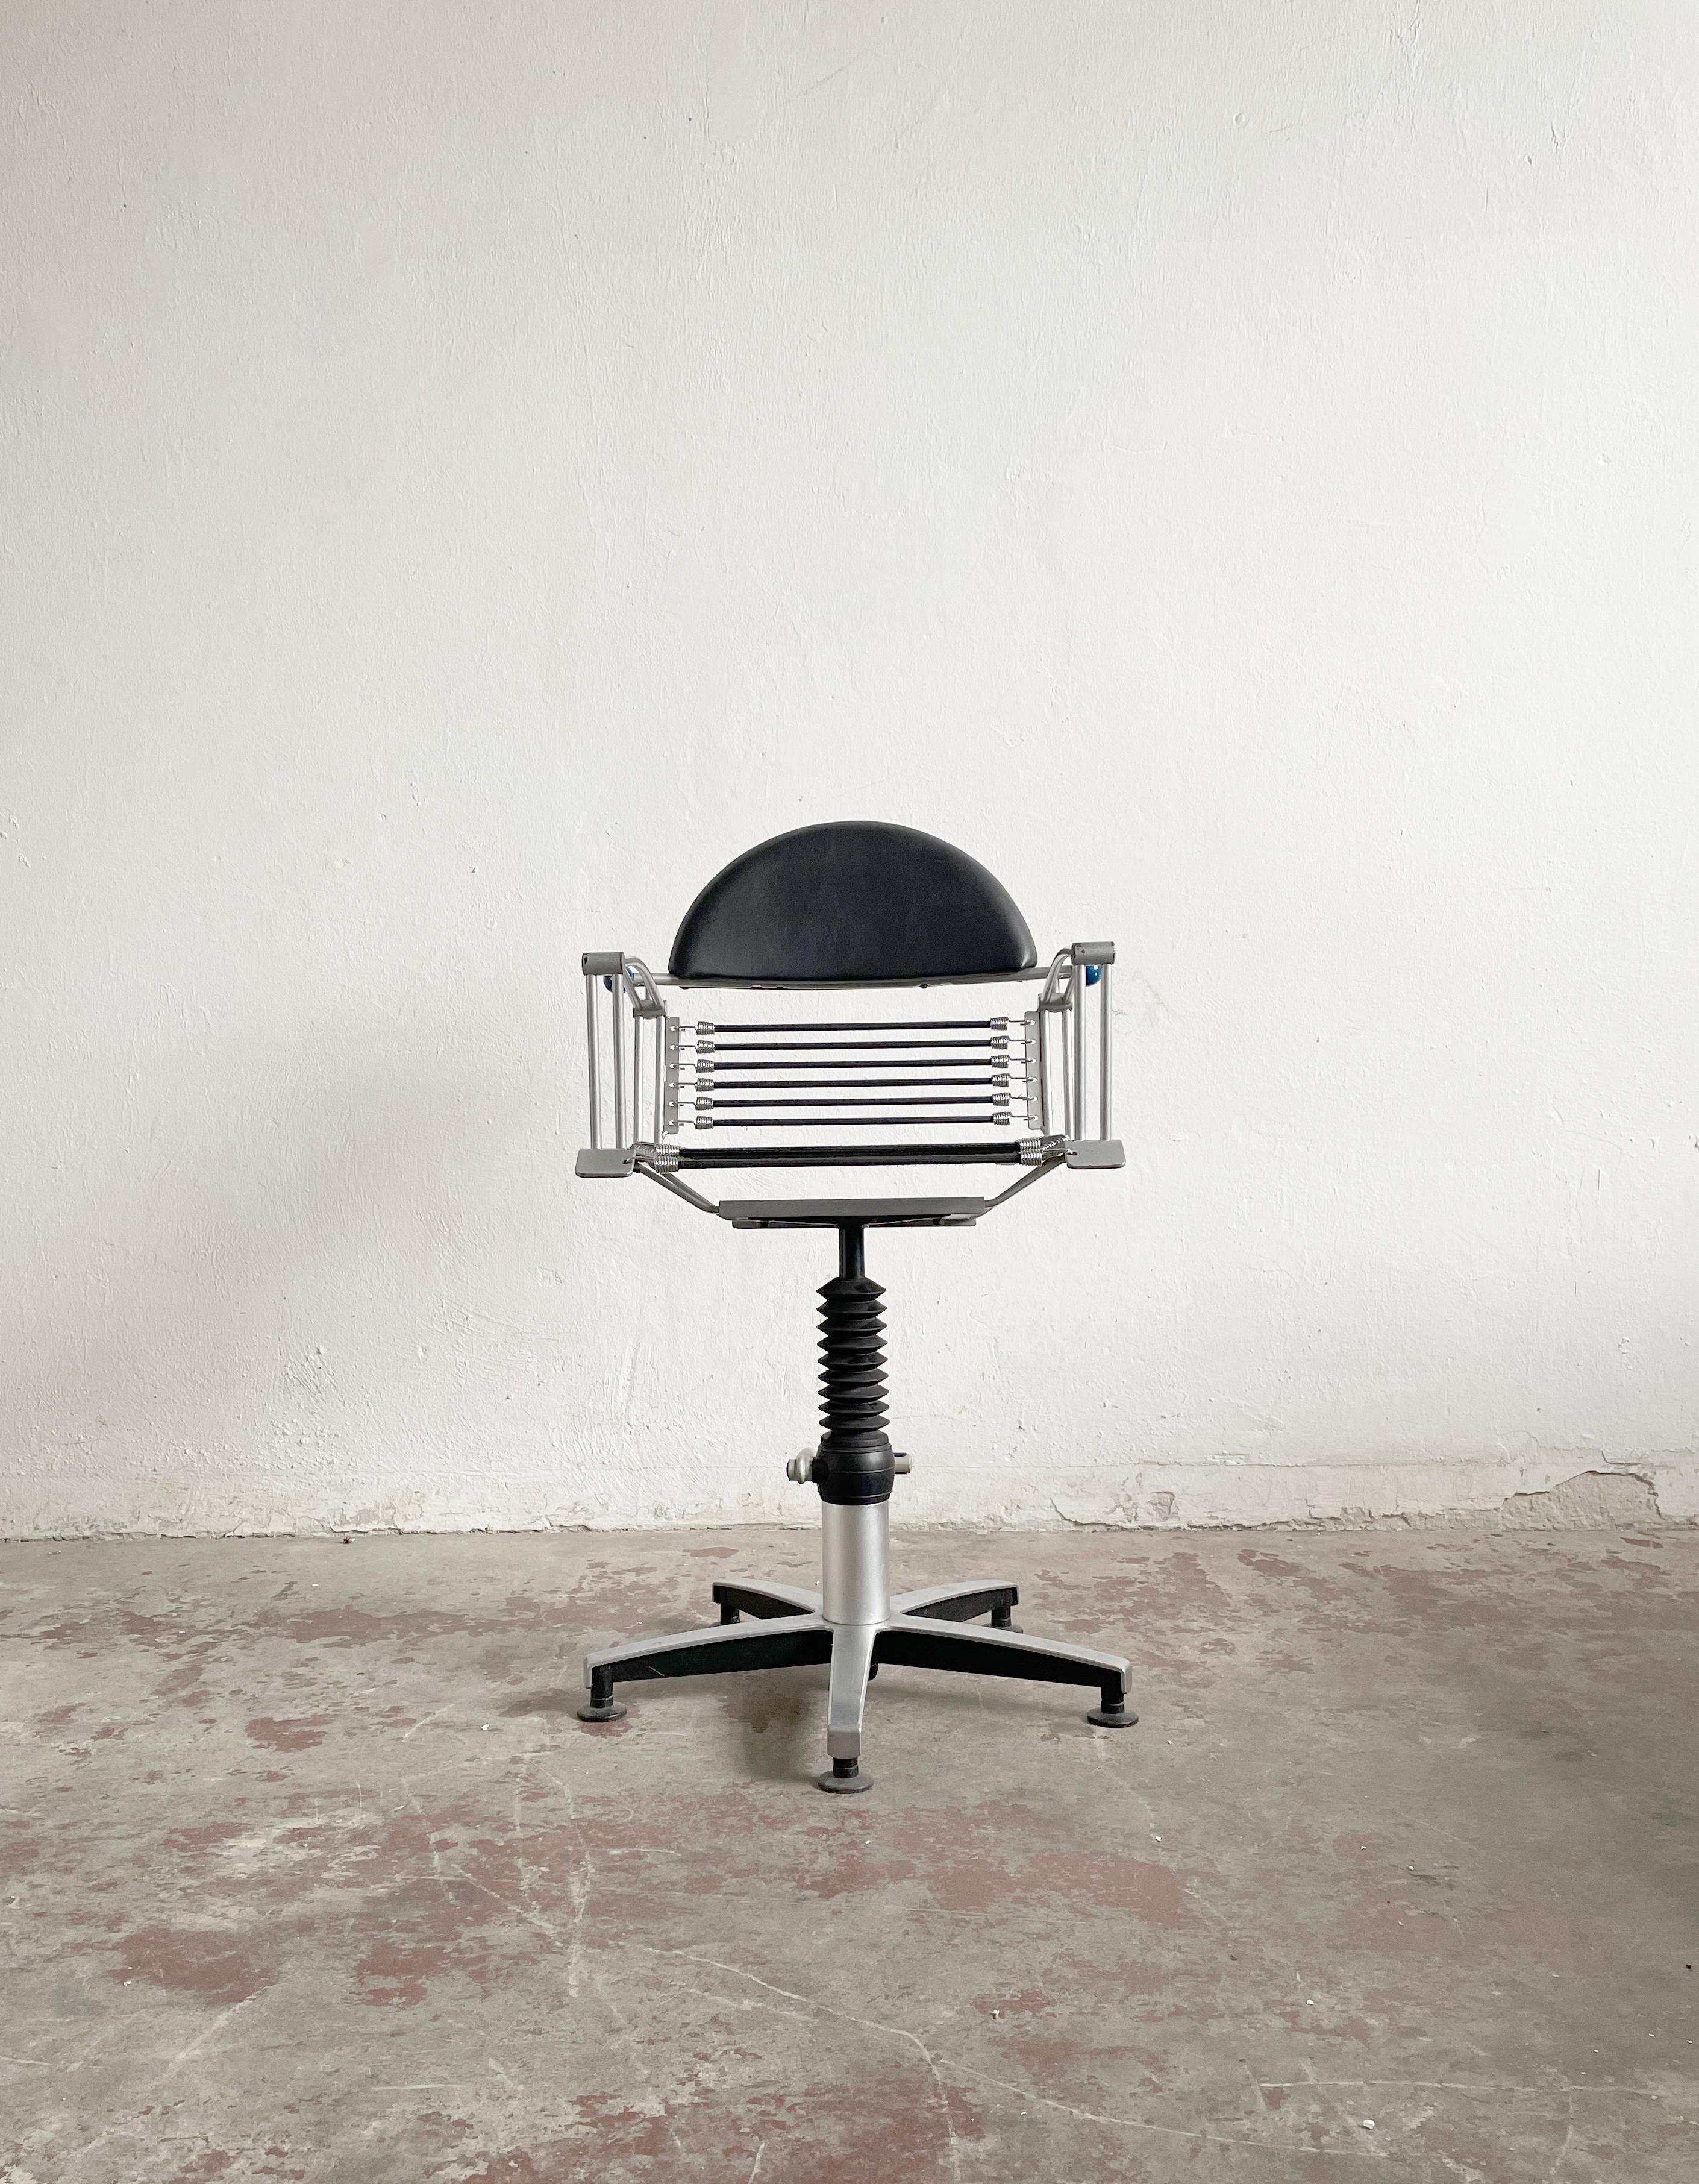 Rare 1980s Welonda swivel chair the hair studio produced by German Company Wella
Designed as a Hair-salon chair, adjustable height, swivel mechanism

Postmodern design

Unique seat made of steel wire coated in black fabric

The height of the